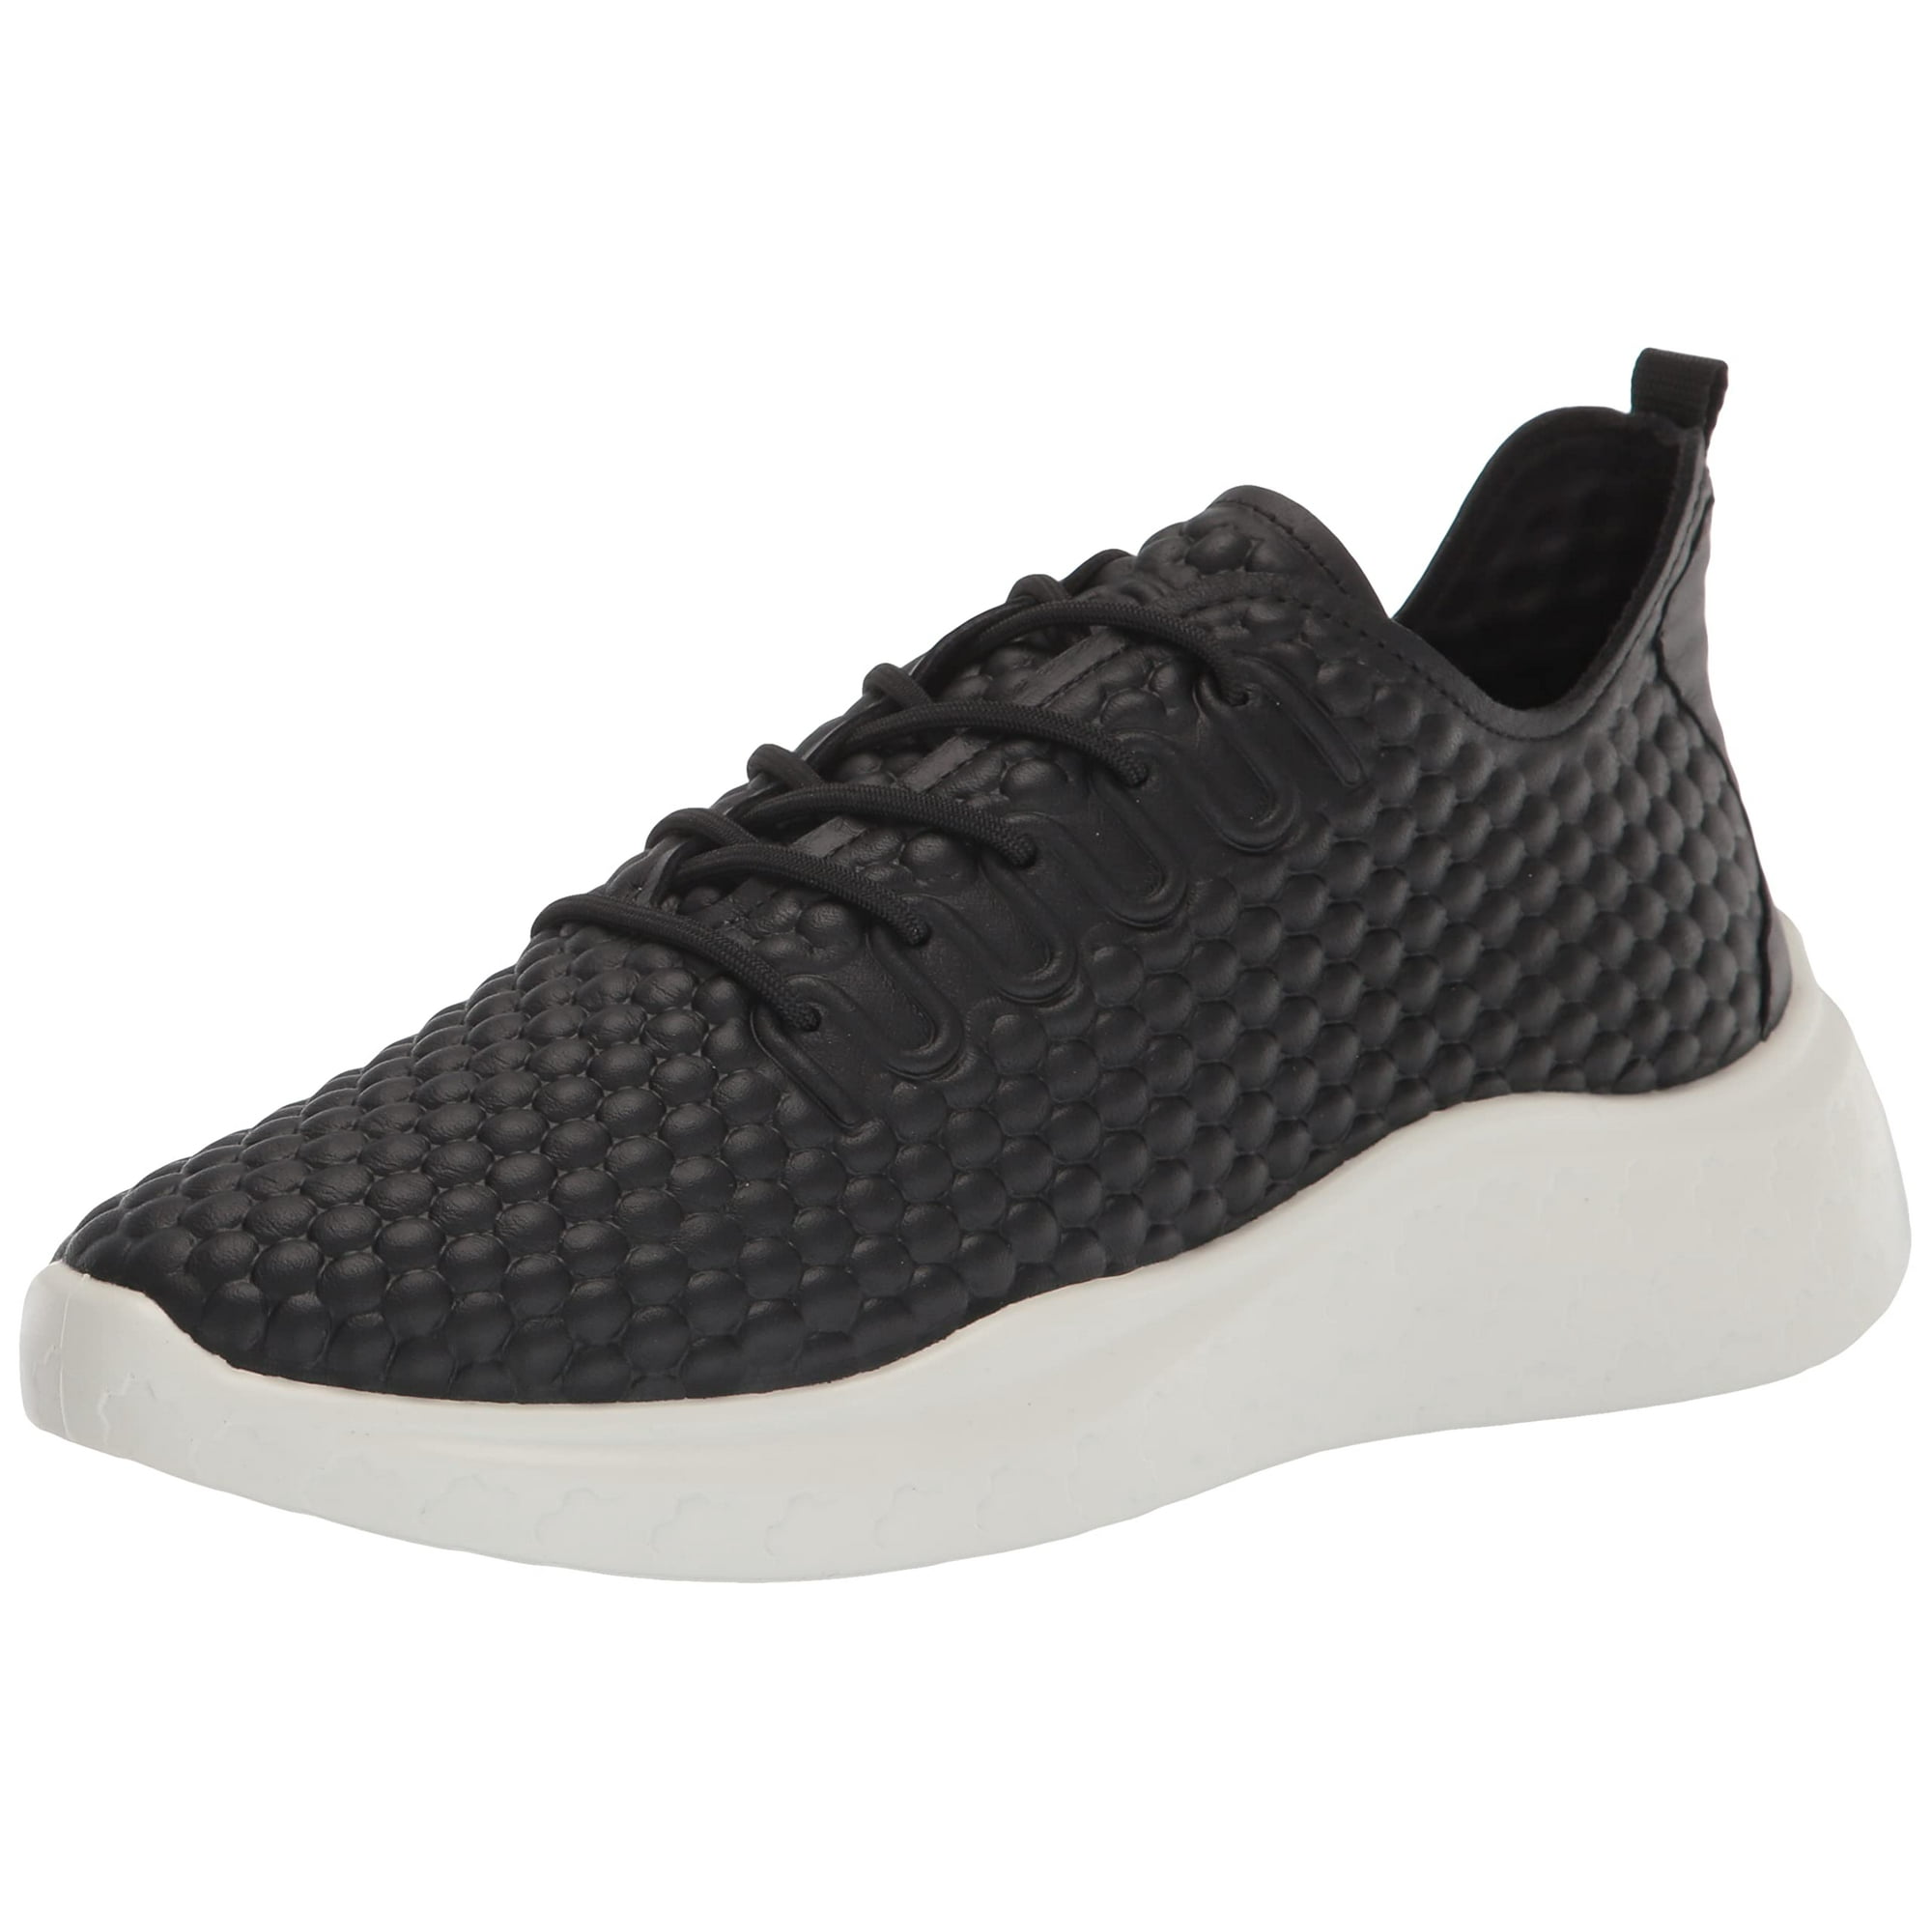 absorberende opføre sig suppe ECCO Women's Therap Lace Sneaker, Black, 9-9.5 | Walmart Canada